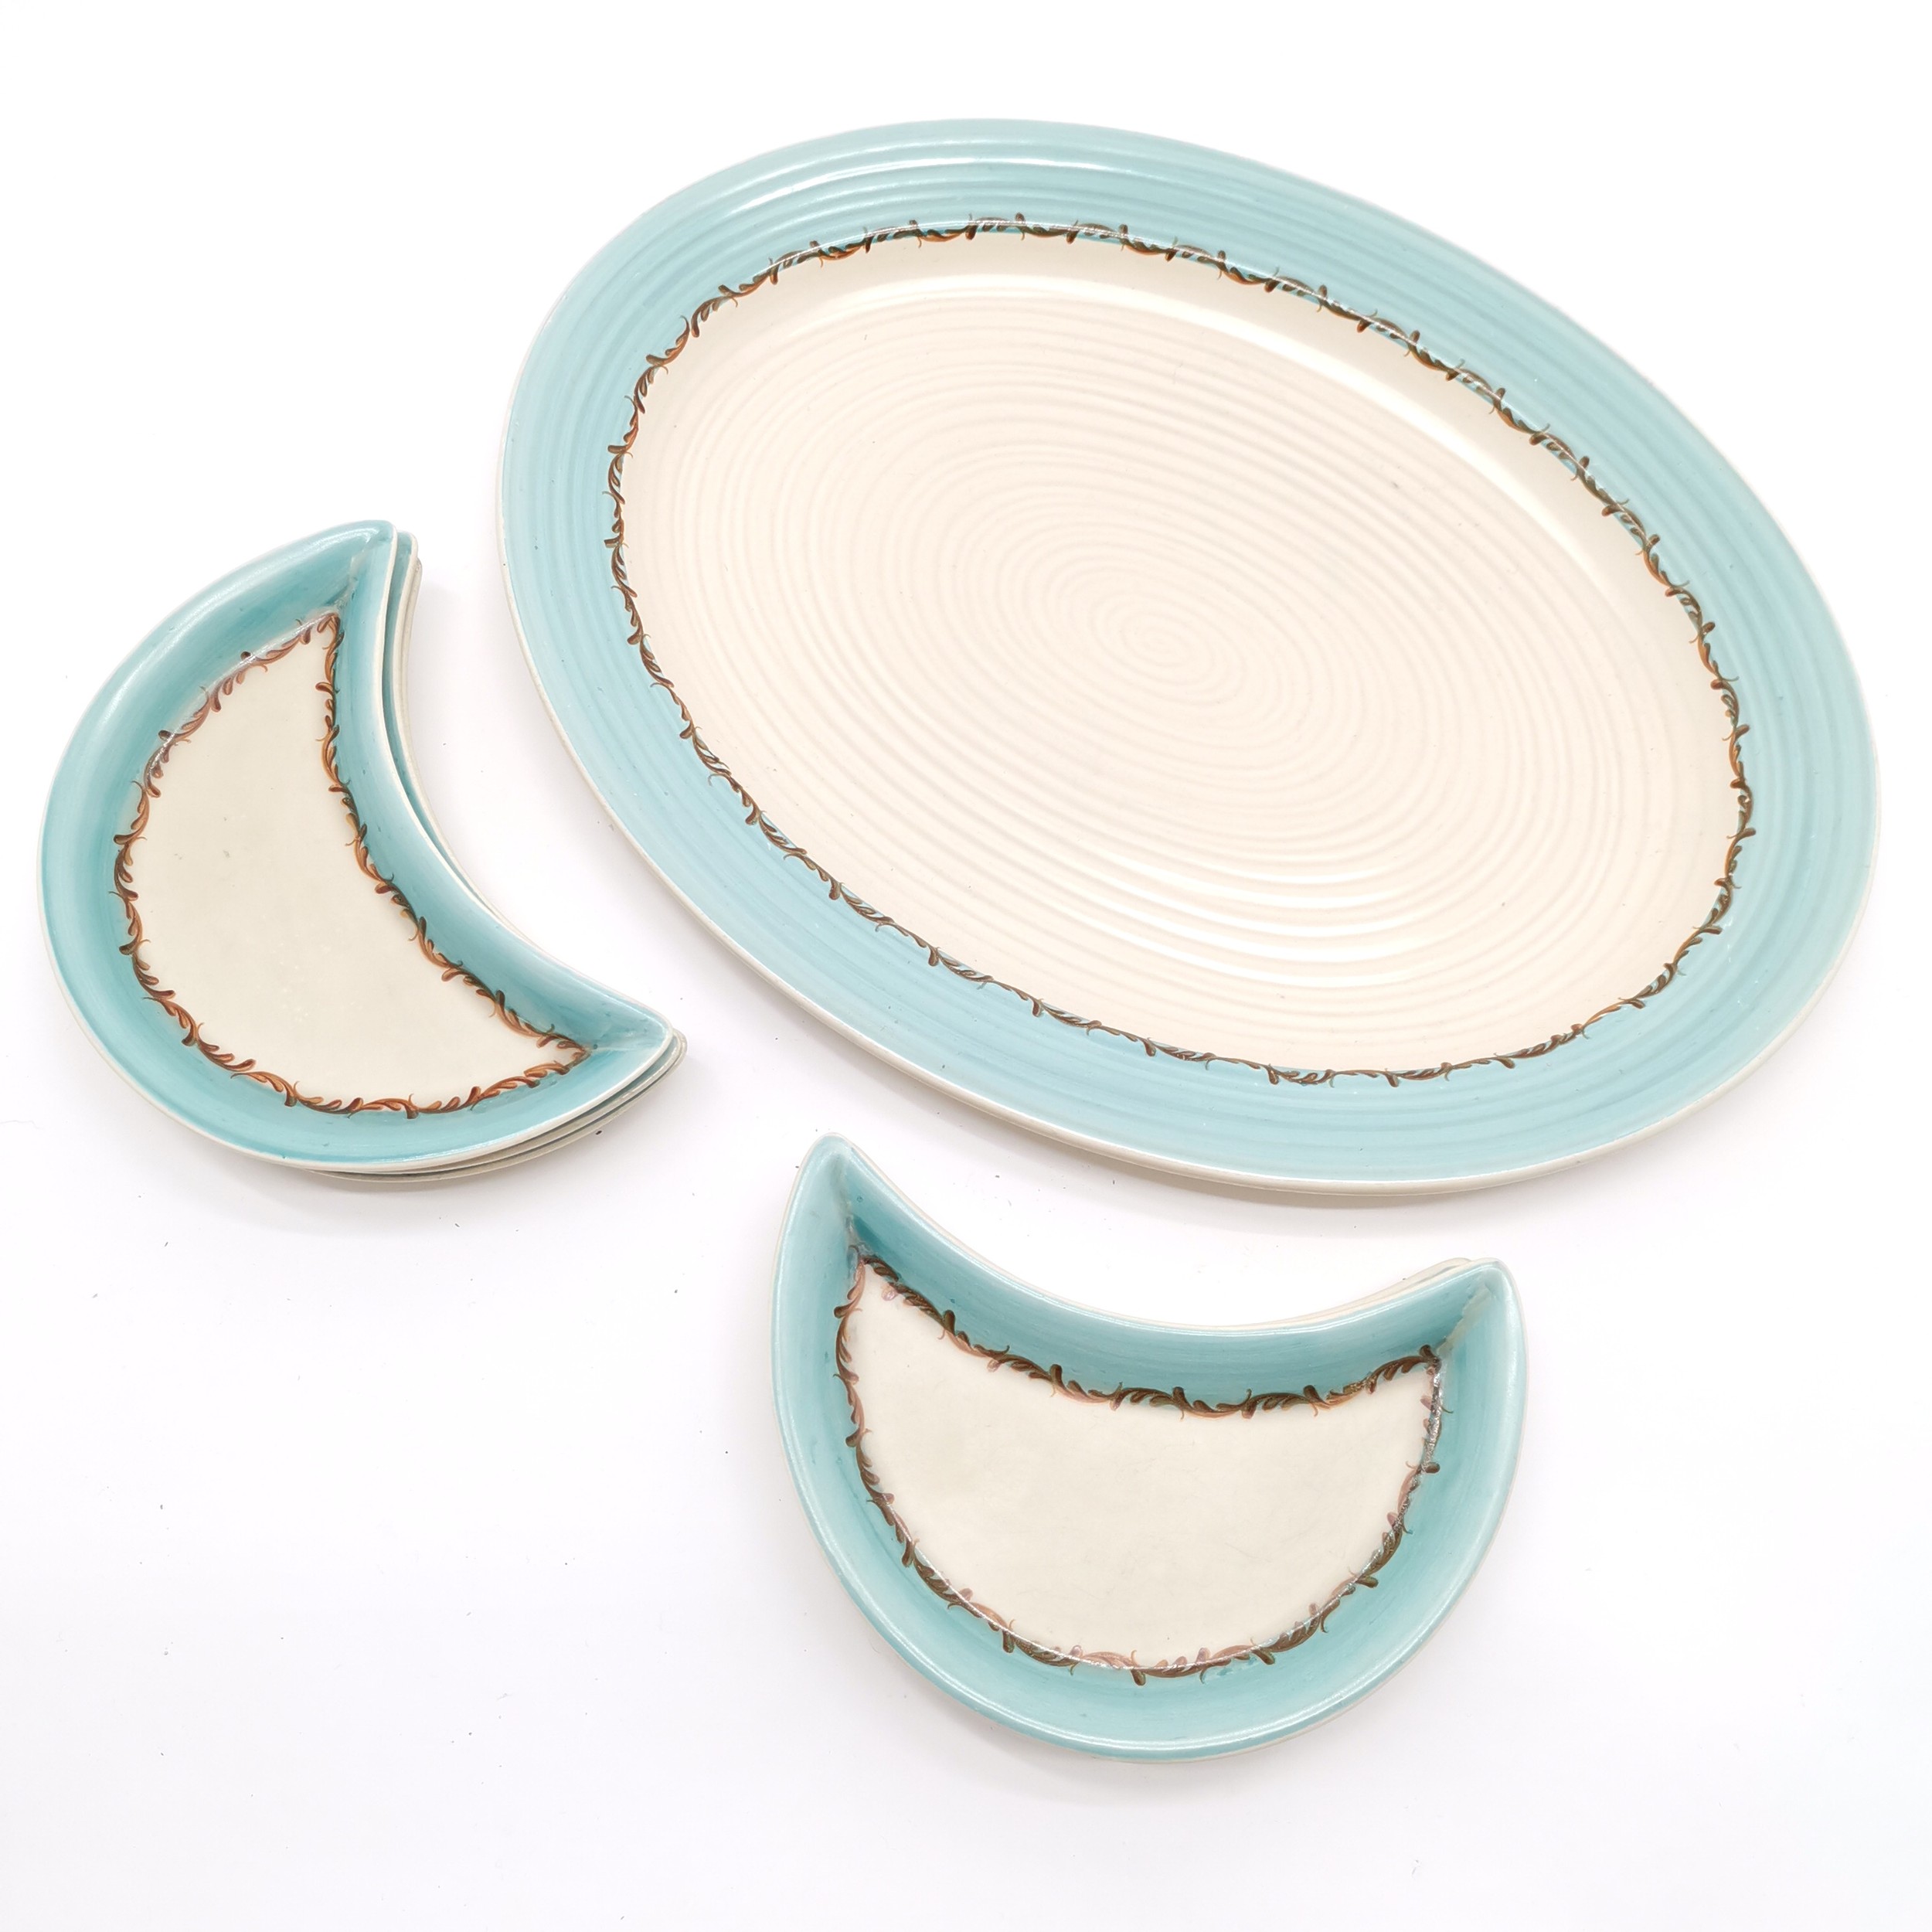 Clarice Cliff unusual serving platter (46cm x 35.5cm) with 6 x crescent shaped hors d'oeuvres dishes - Image 2 of 4